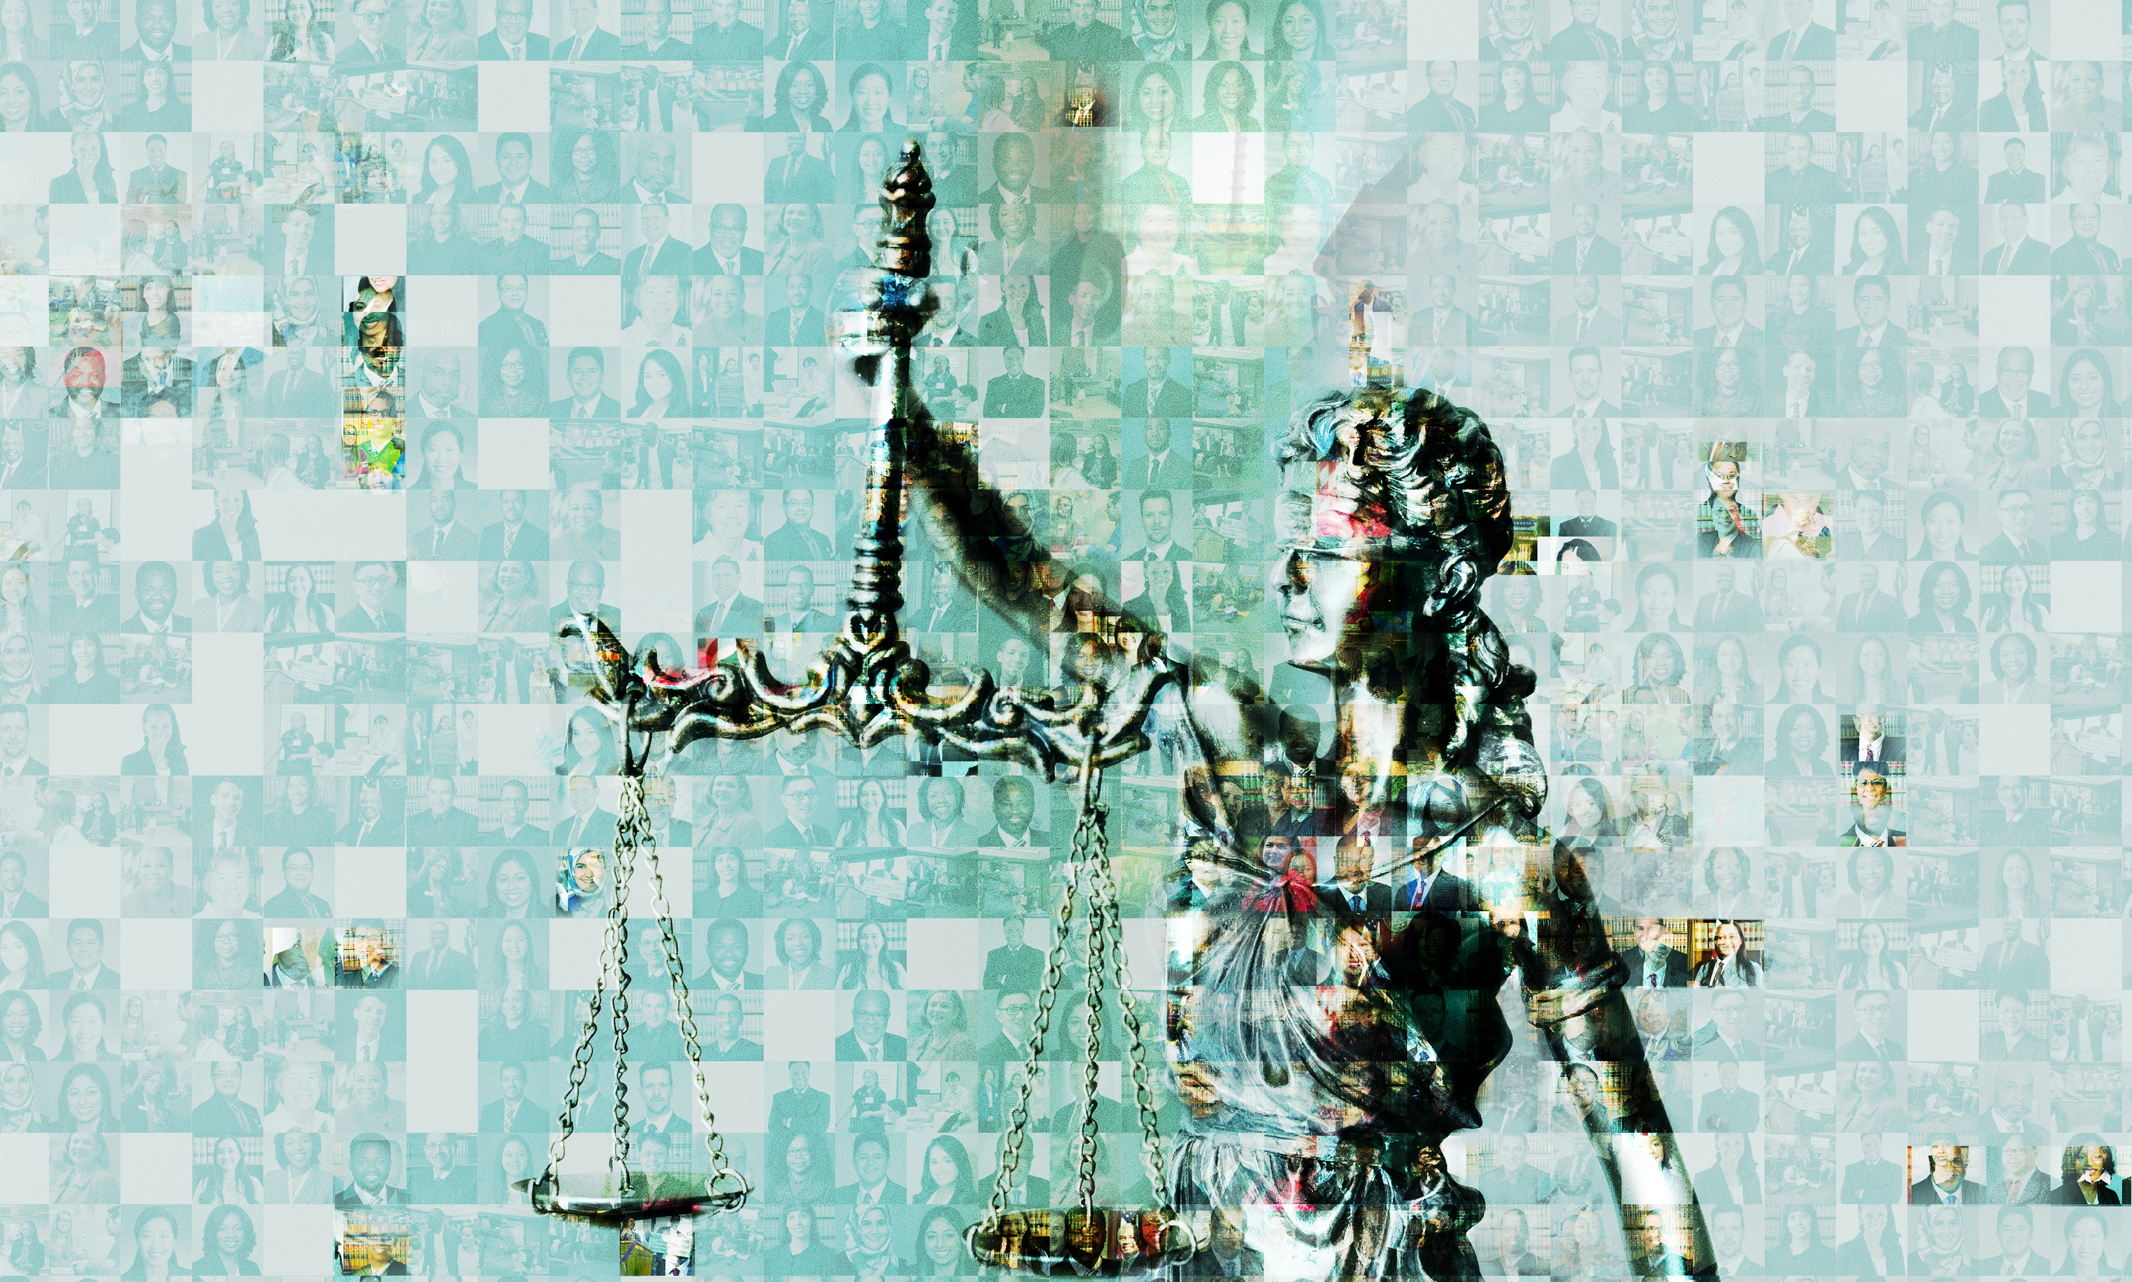 collage of photos make up Lady Justice image